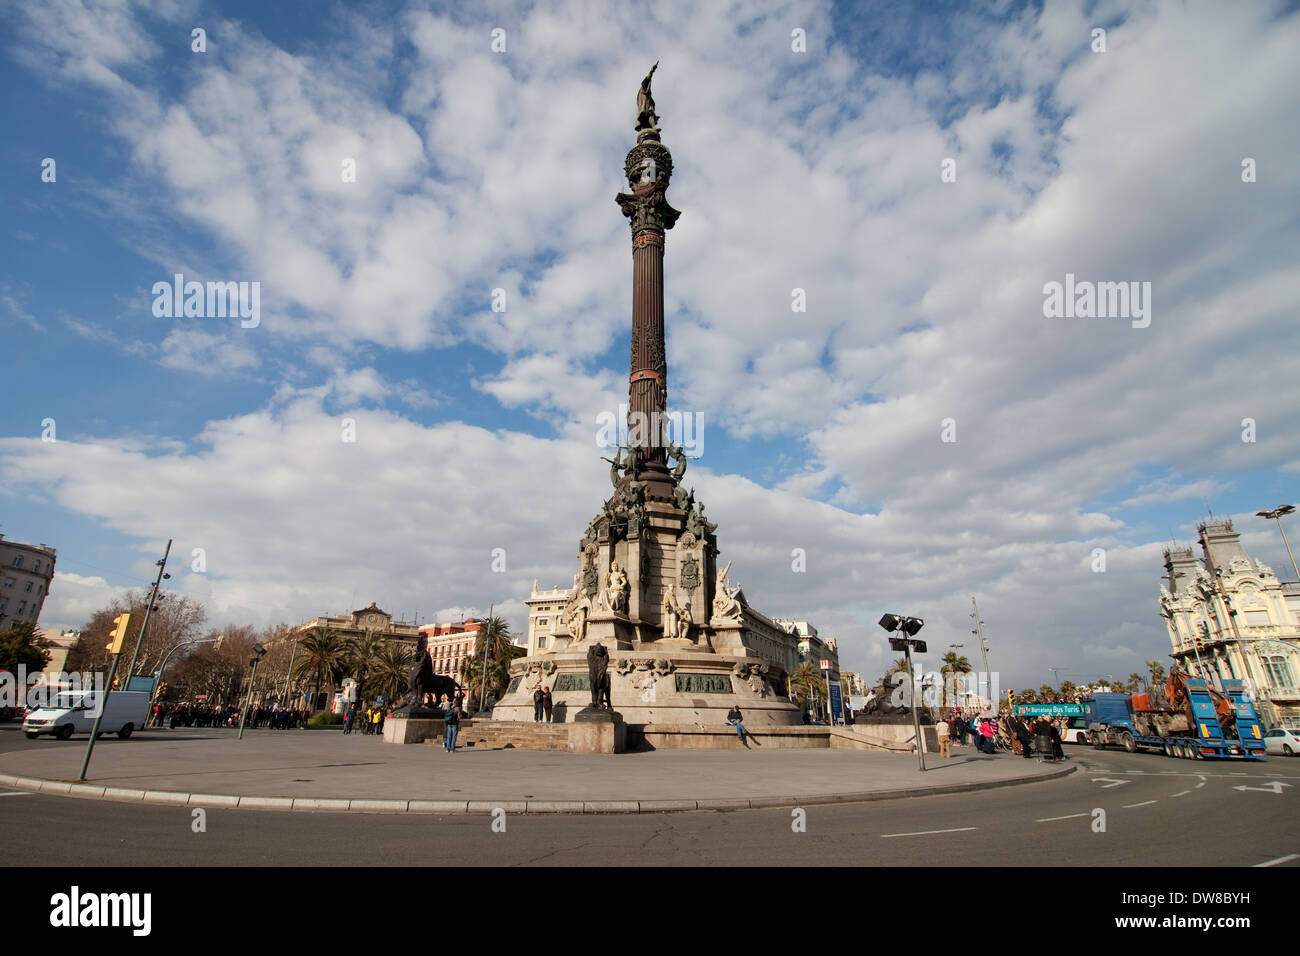 The Columbus Monument built by Gaieta Buigas in 1888 to commemorate the first voyage of Christopher Columbus to the Americas. Stock Photo